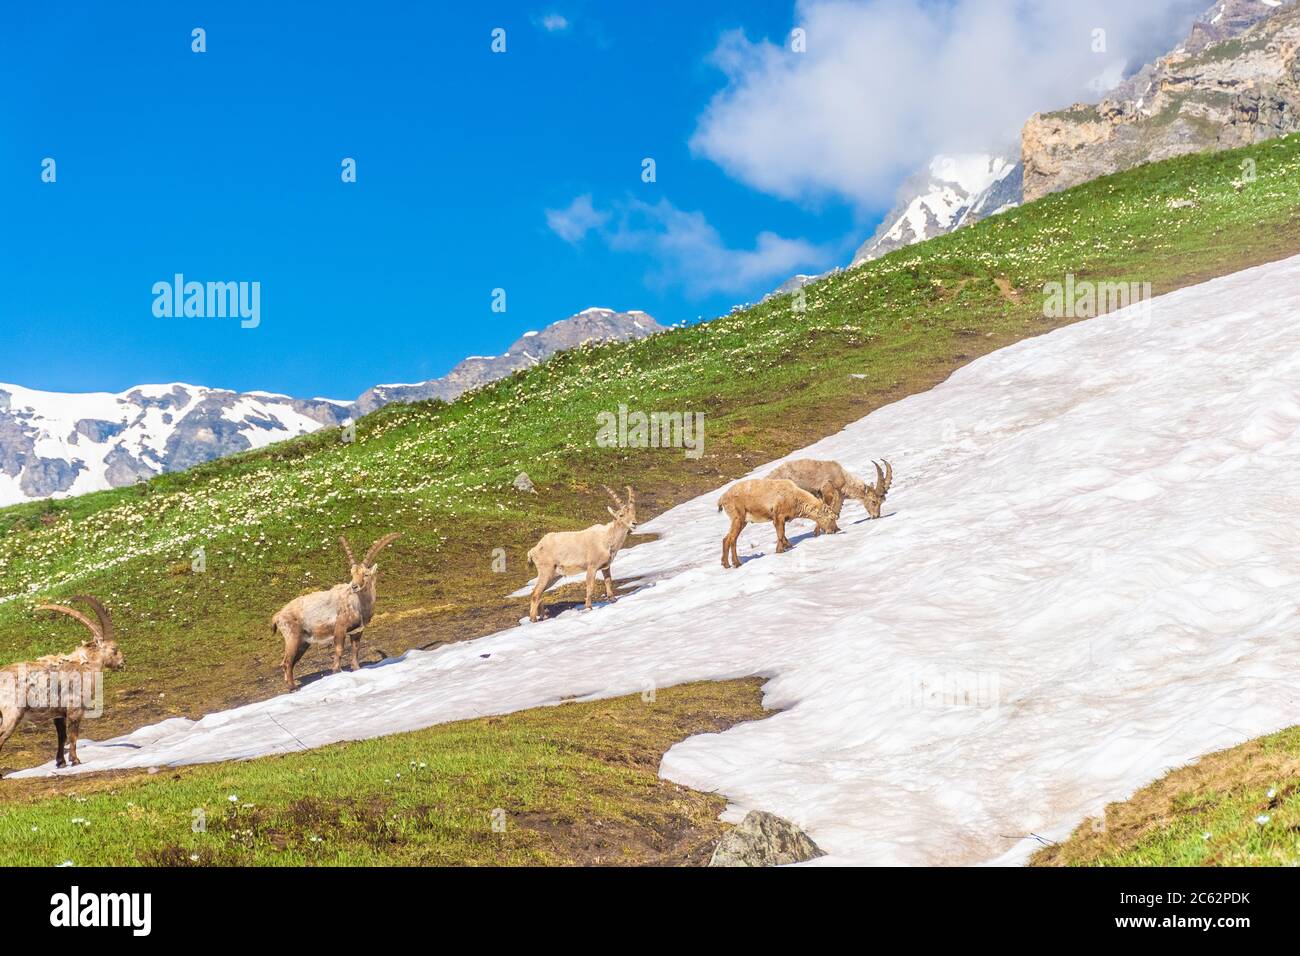 Beautiful Alpine ibex in the snowy mountains of Gran Paradiso National Park in Italy Stock Photo